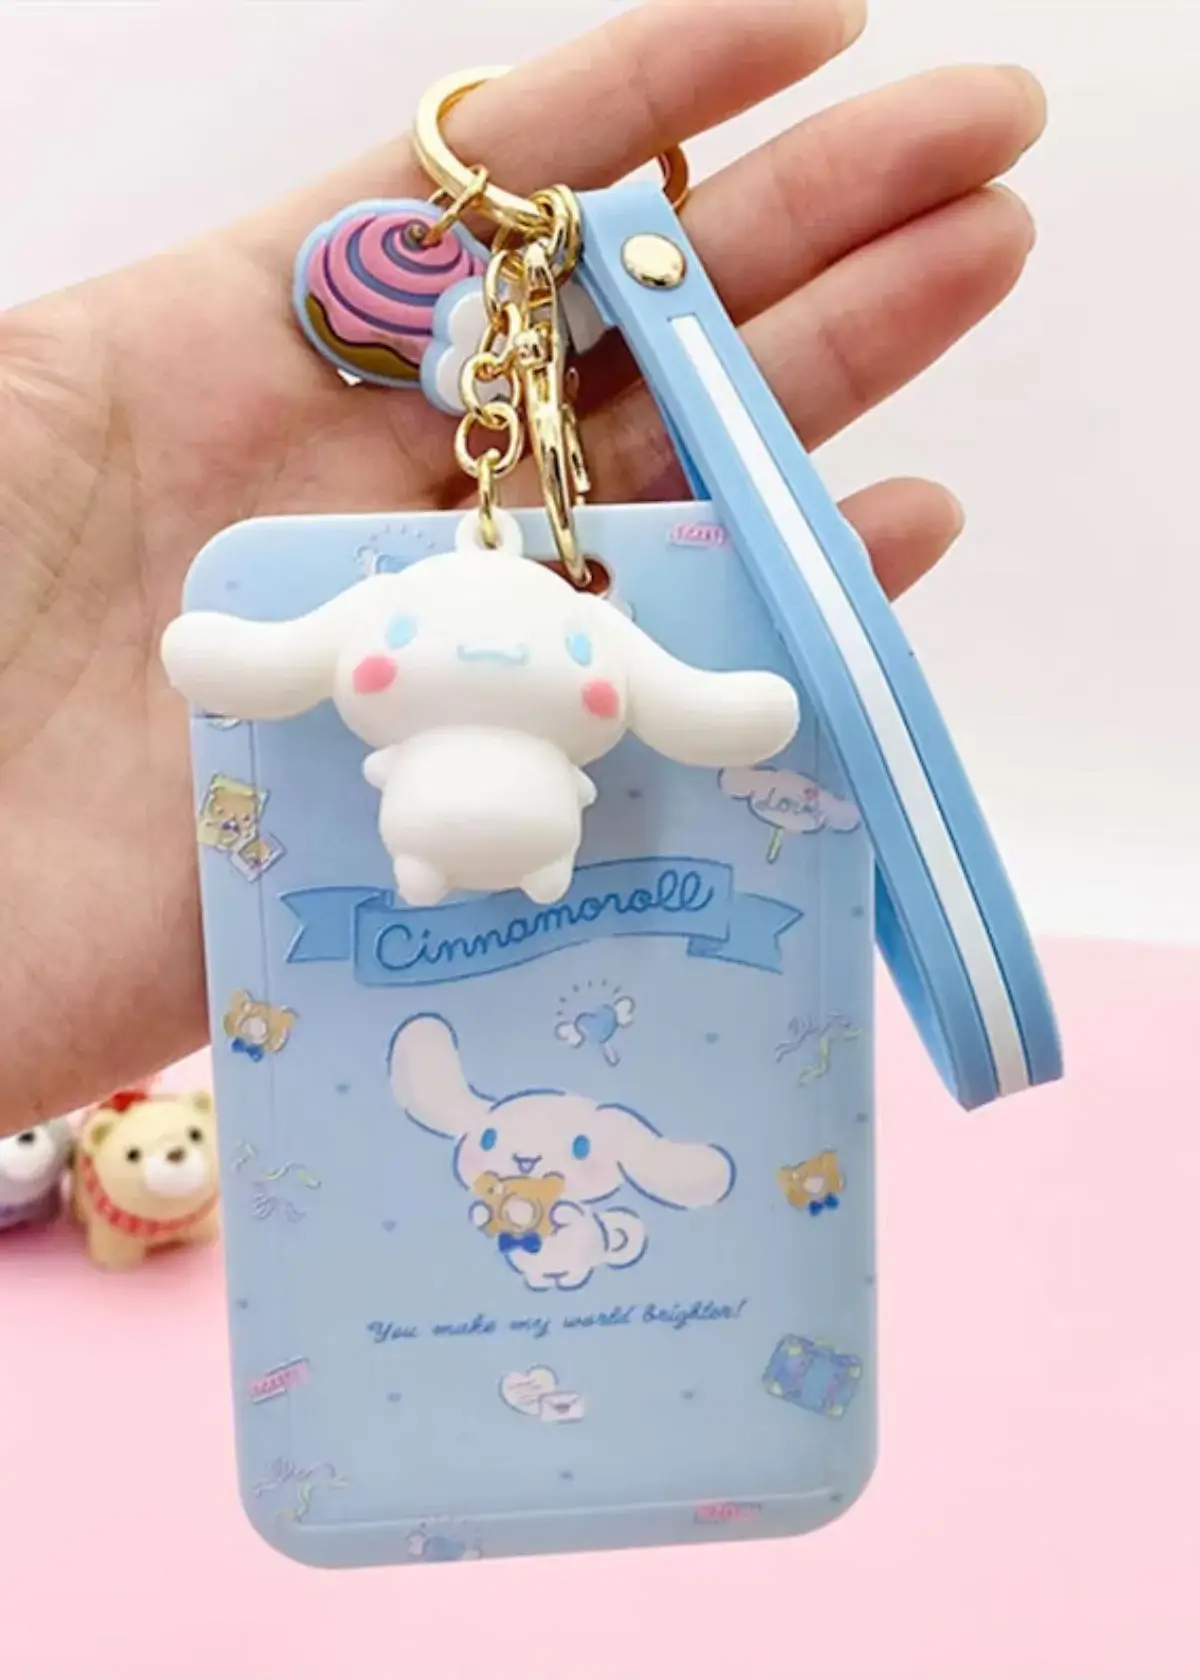 How to choose the right cinnamoroll wallet?